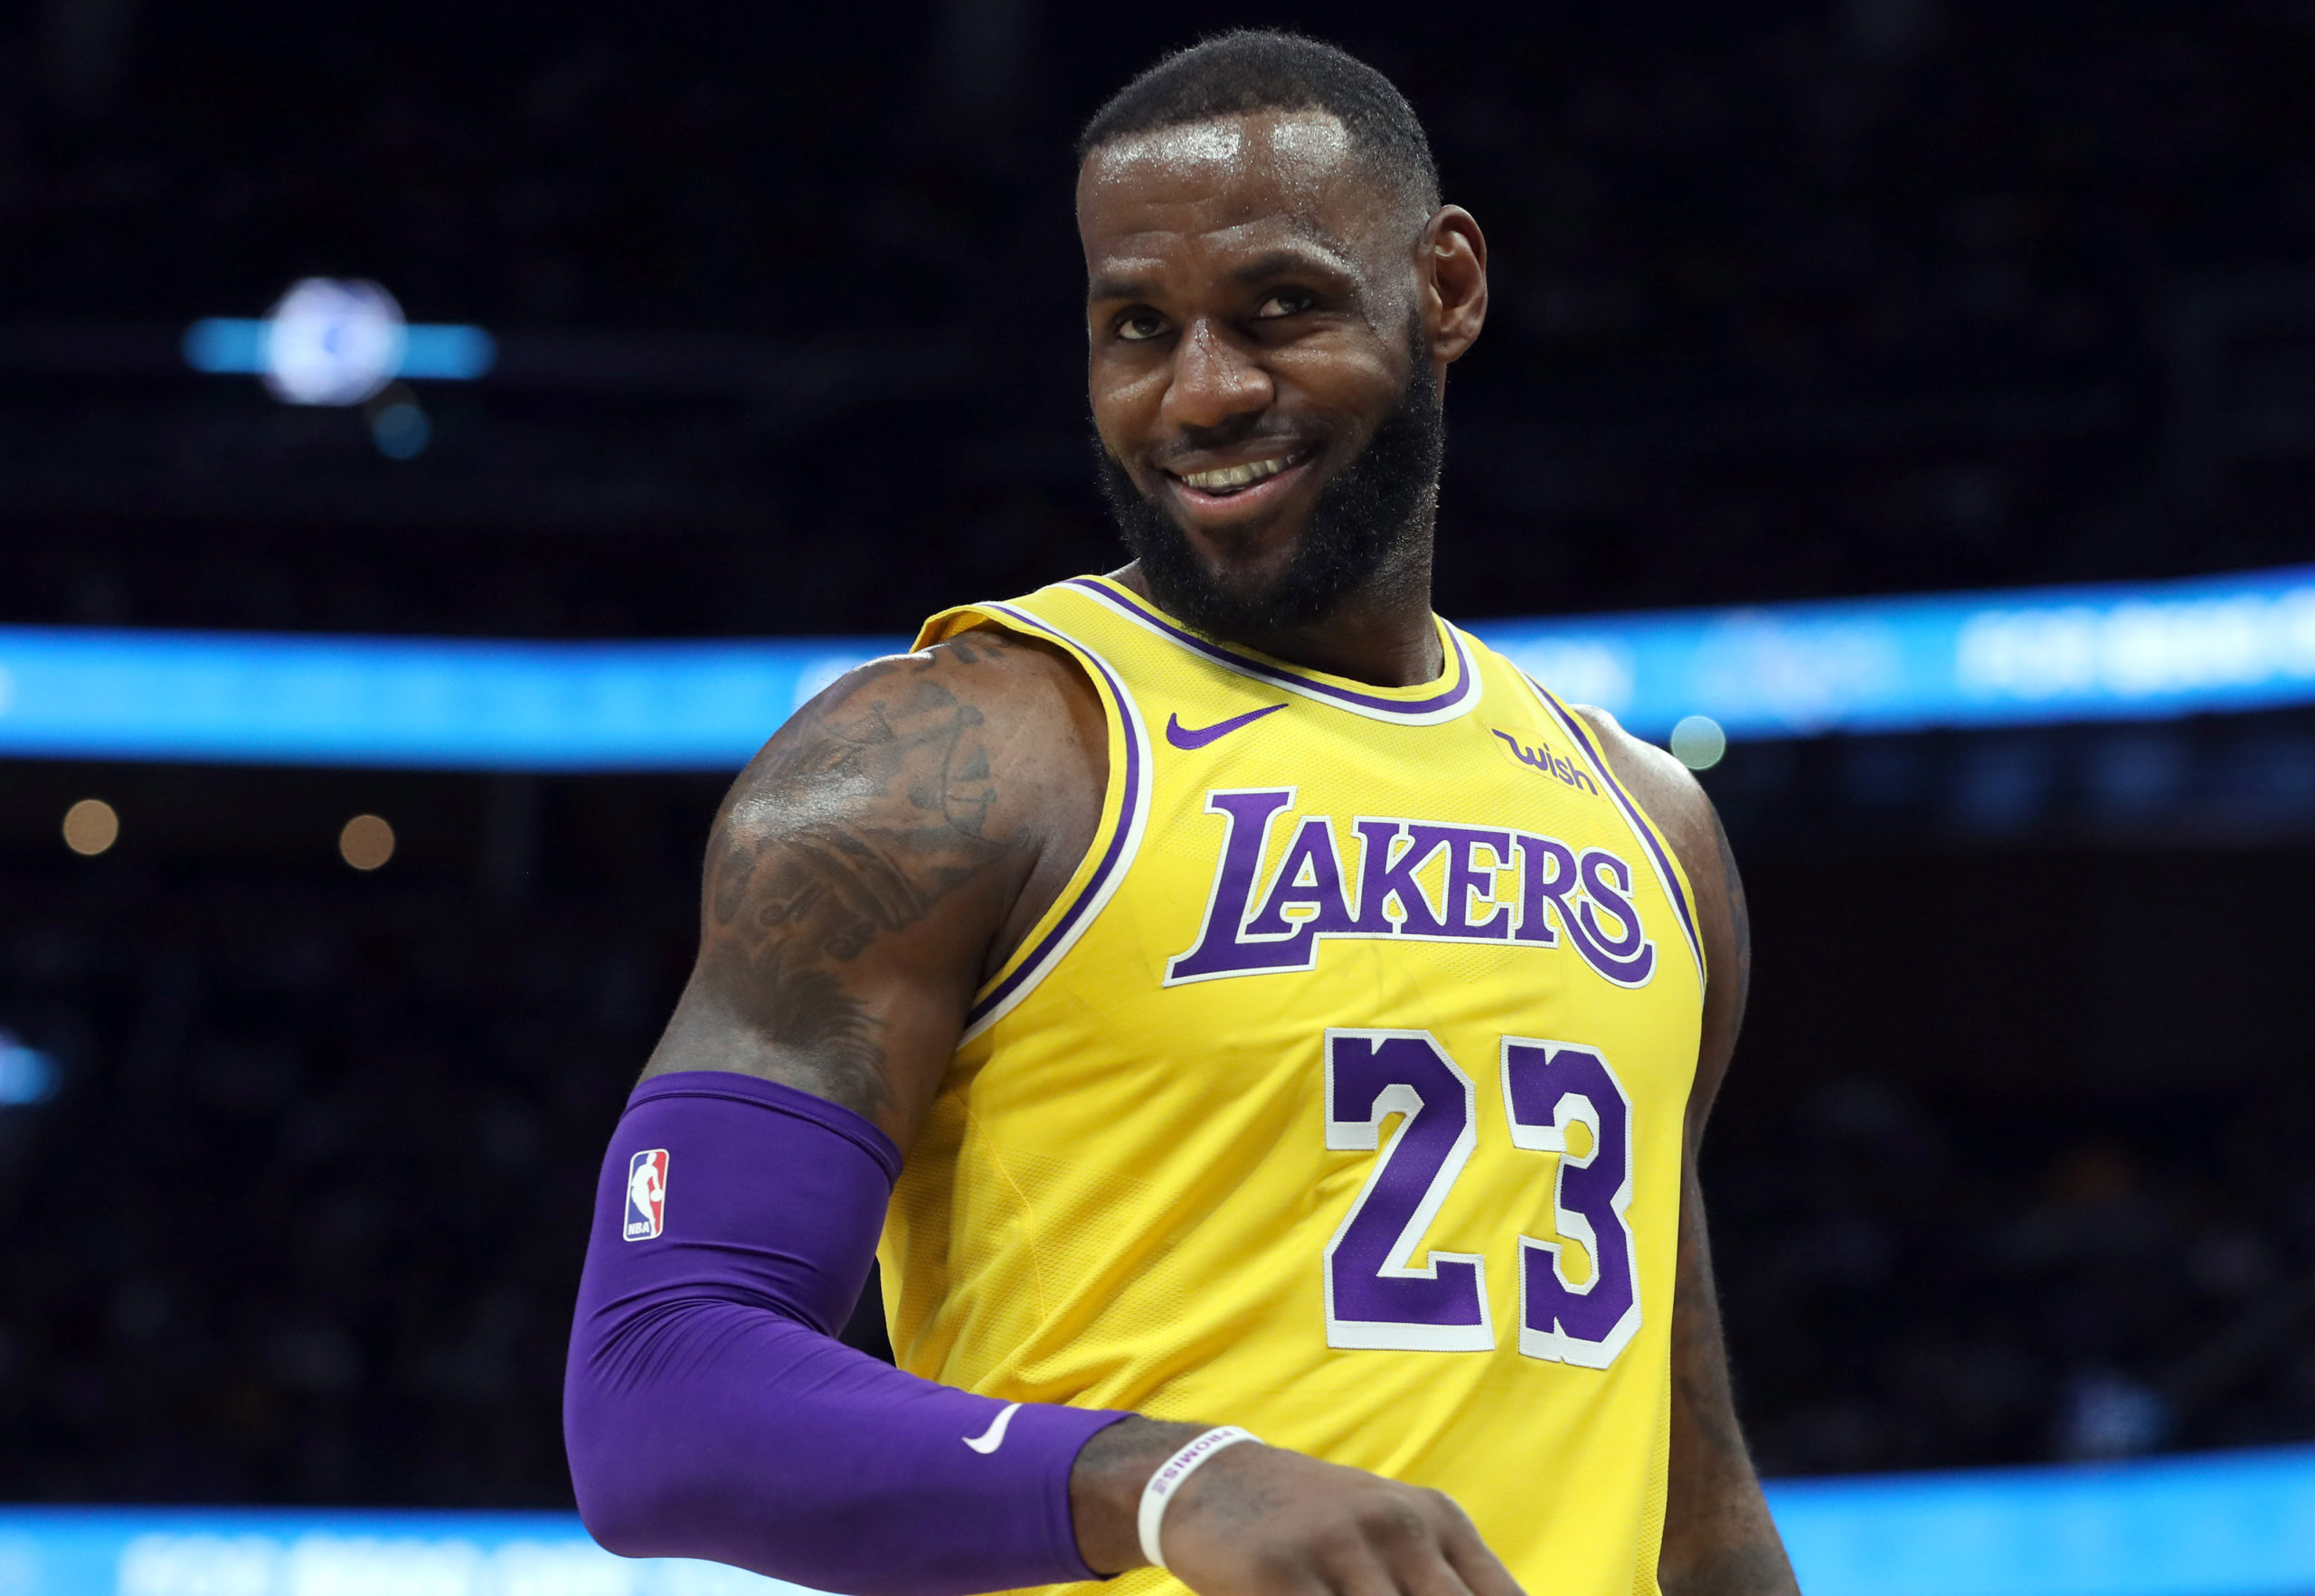 LeBron James Becomes First Active NBA Player With $1b In Career Earnings